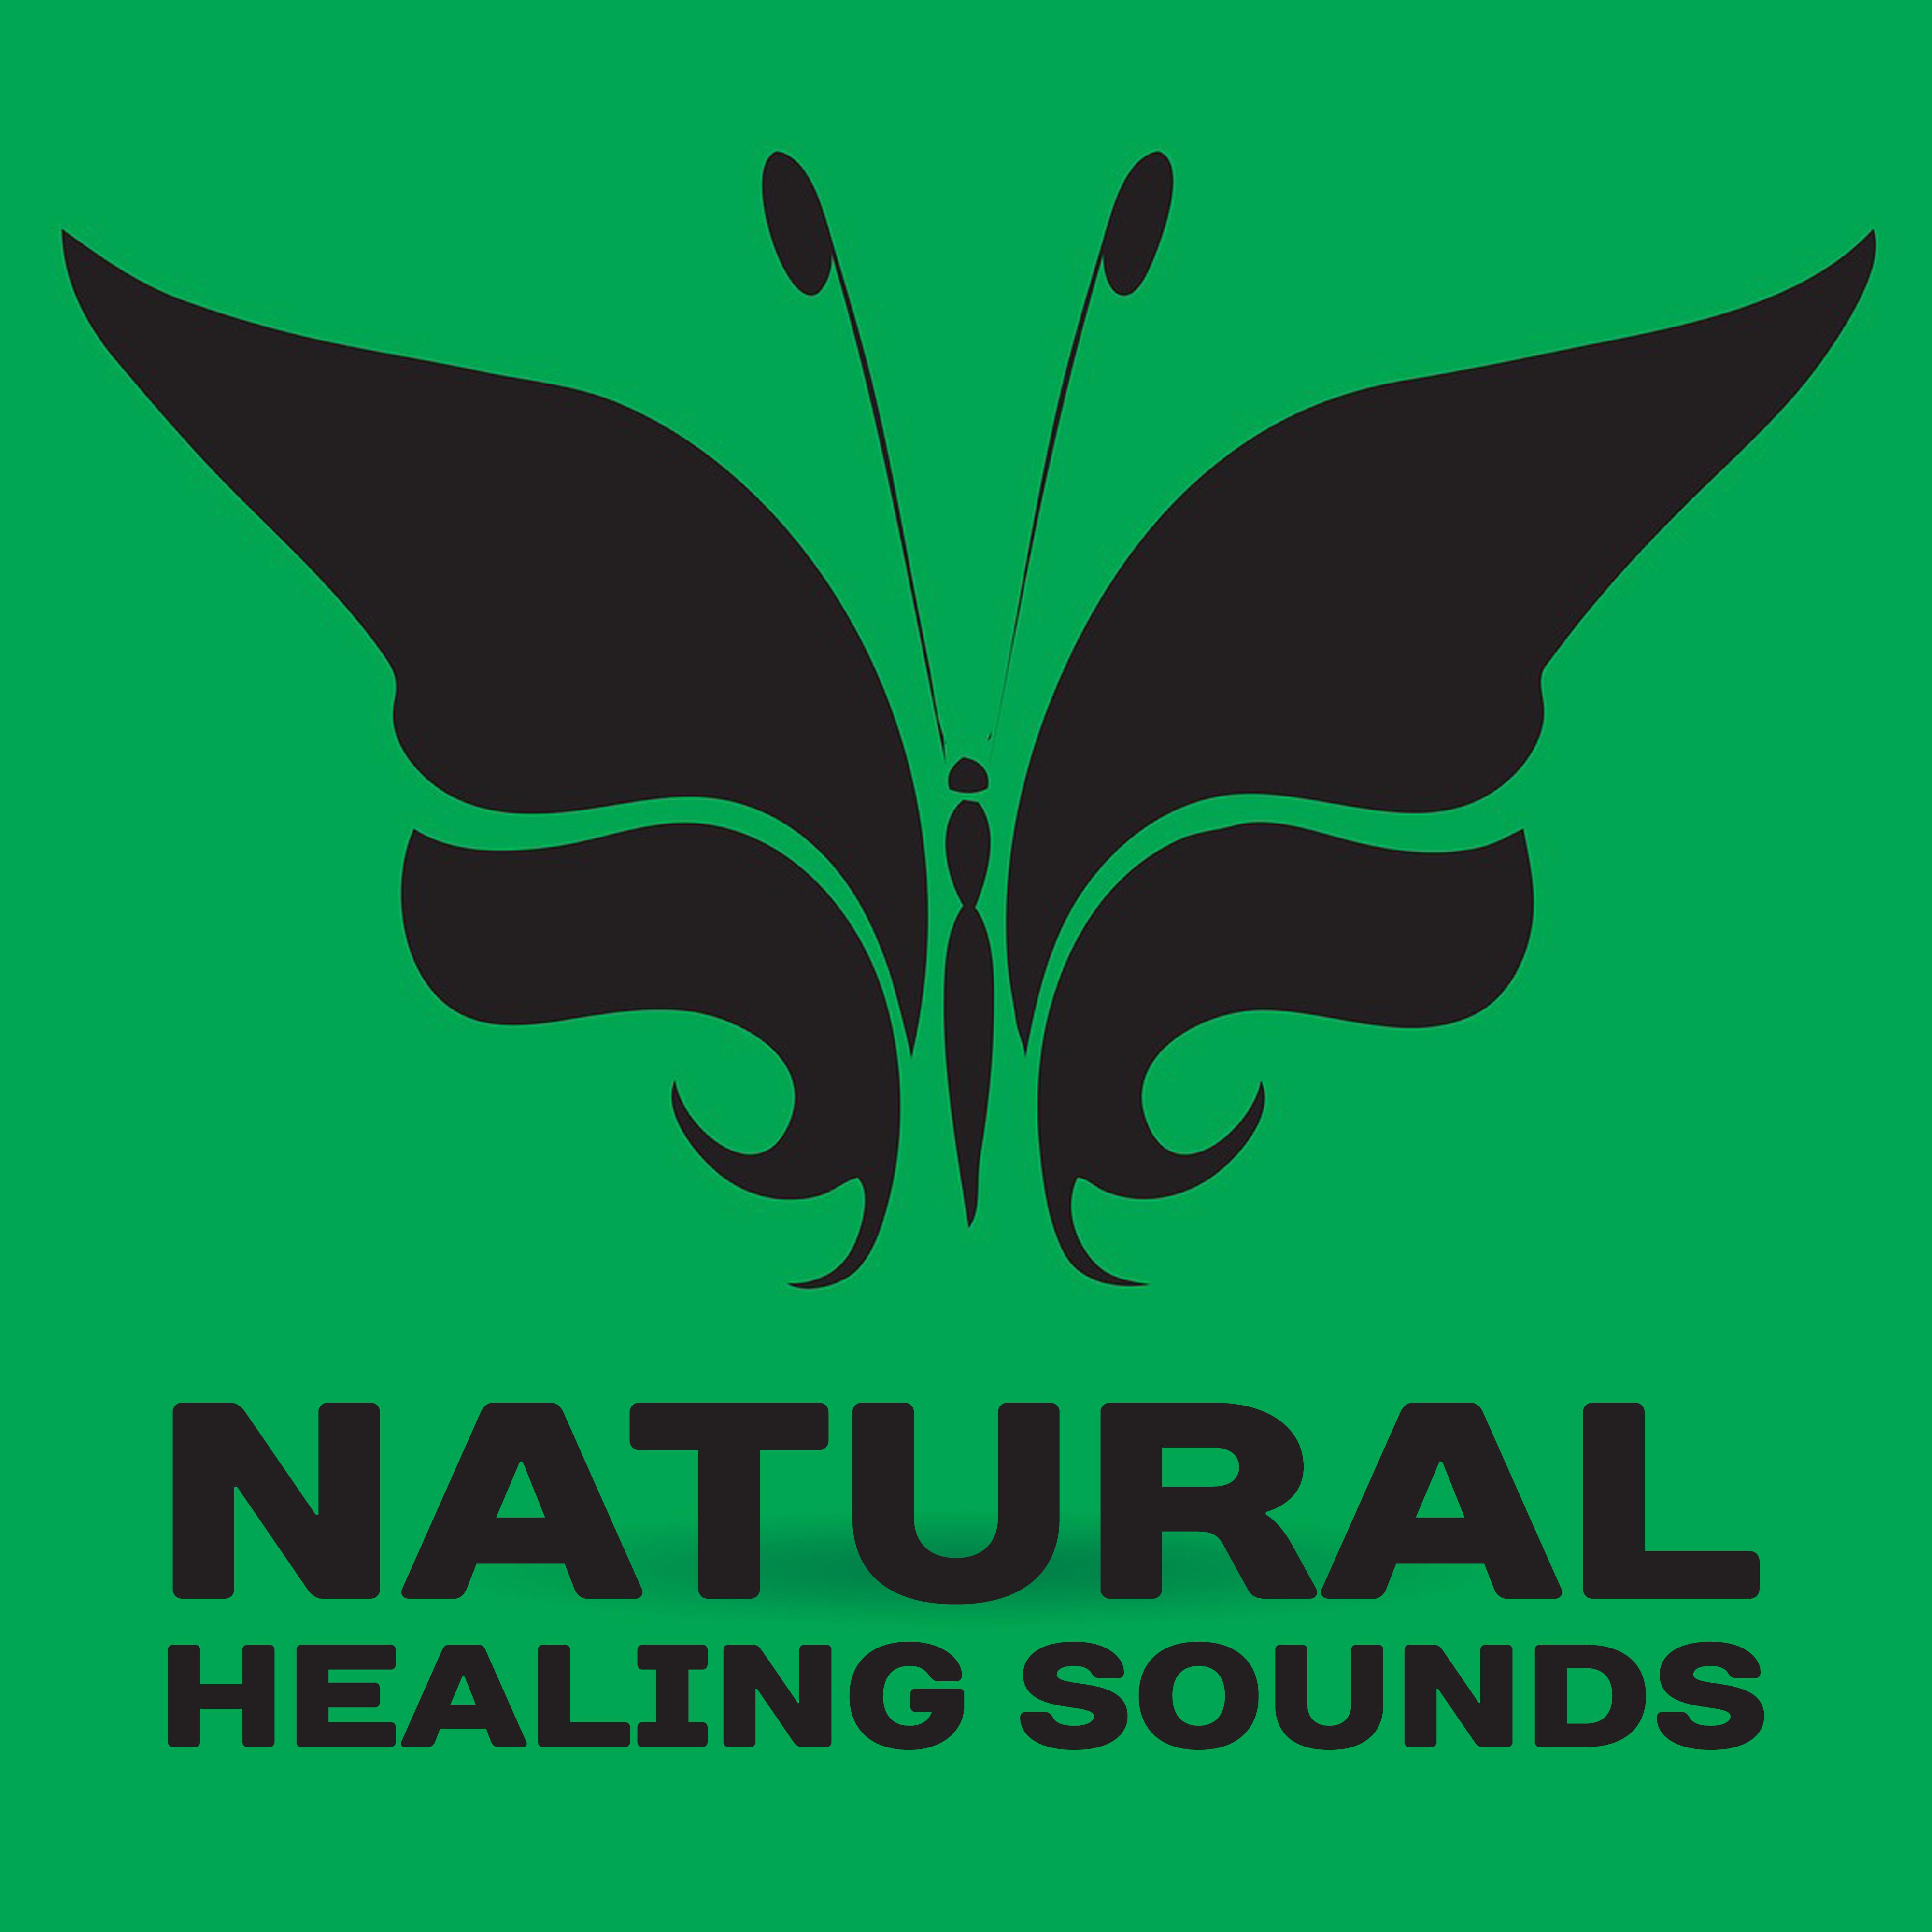 Natural Healing Sounds  Nature Sounds to Calm Down, Peaceful Music, Waves of Calmness